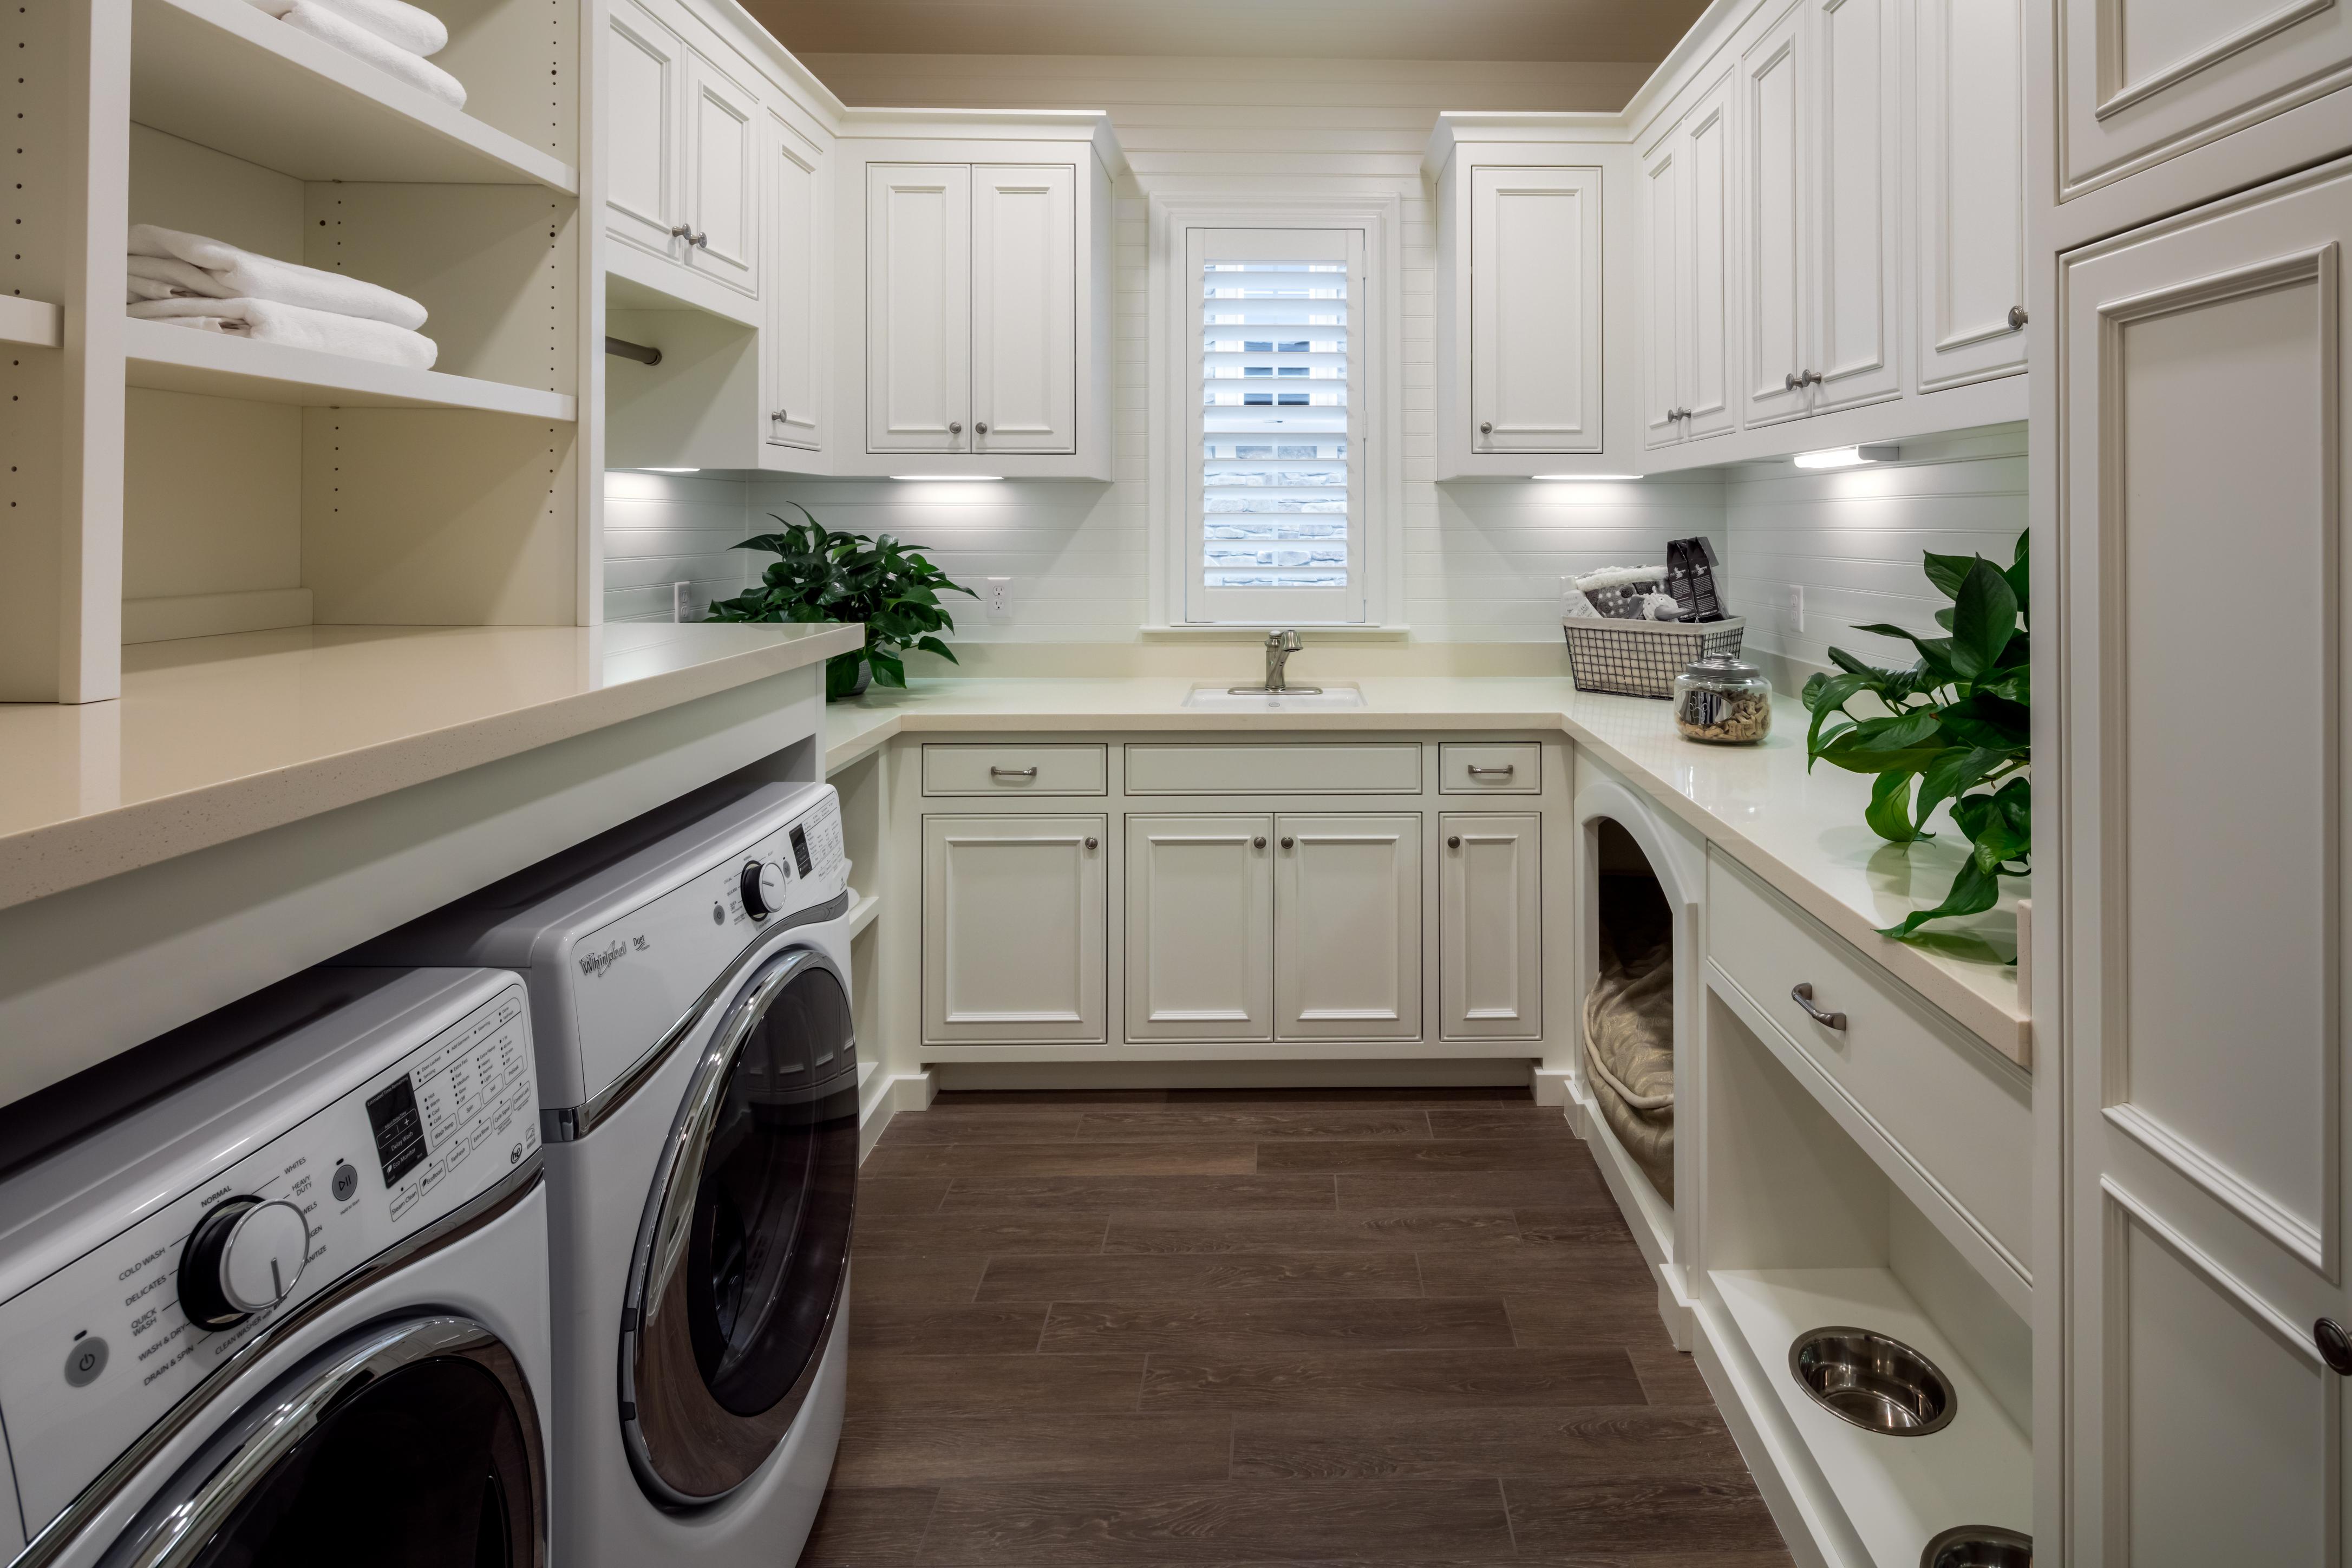 Design a Stylish and Organized Laundry Room | Build Beautiful